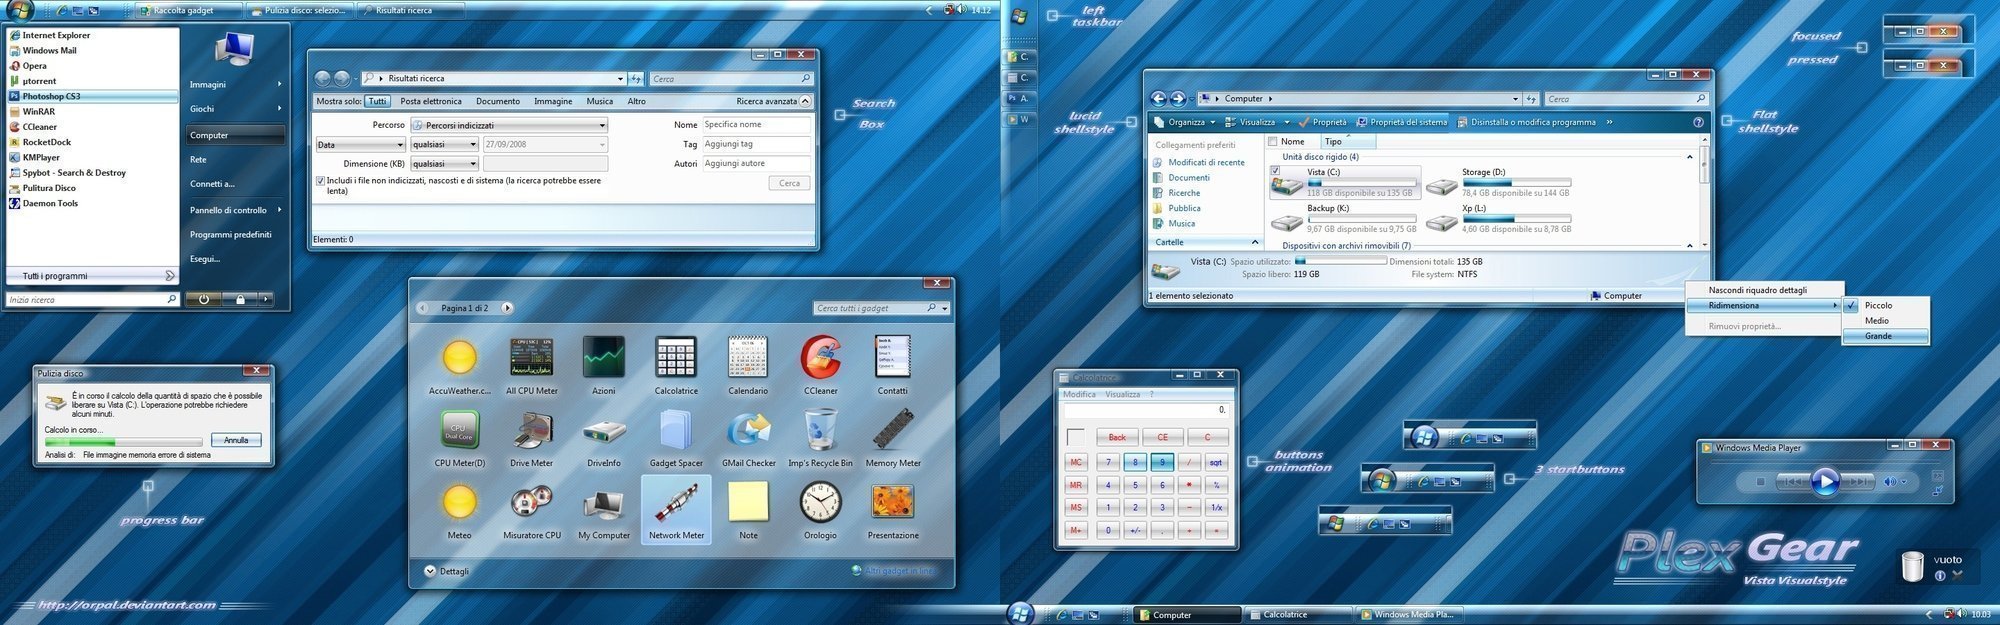 More ways to customize the desktop/External Themes + Legacy Themes plexgear_by_orpal.jpg